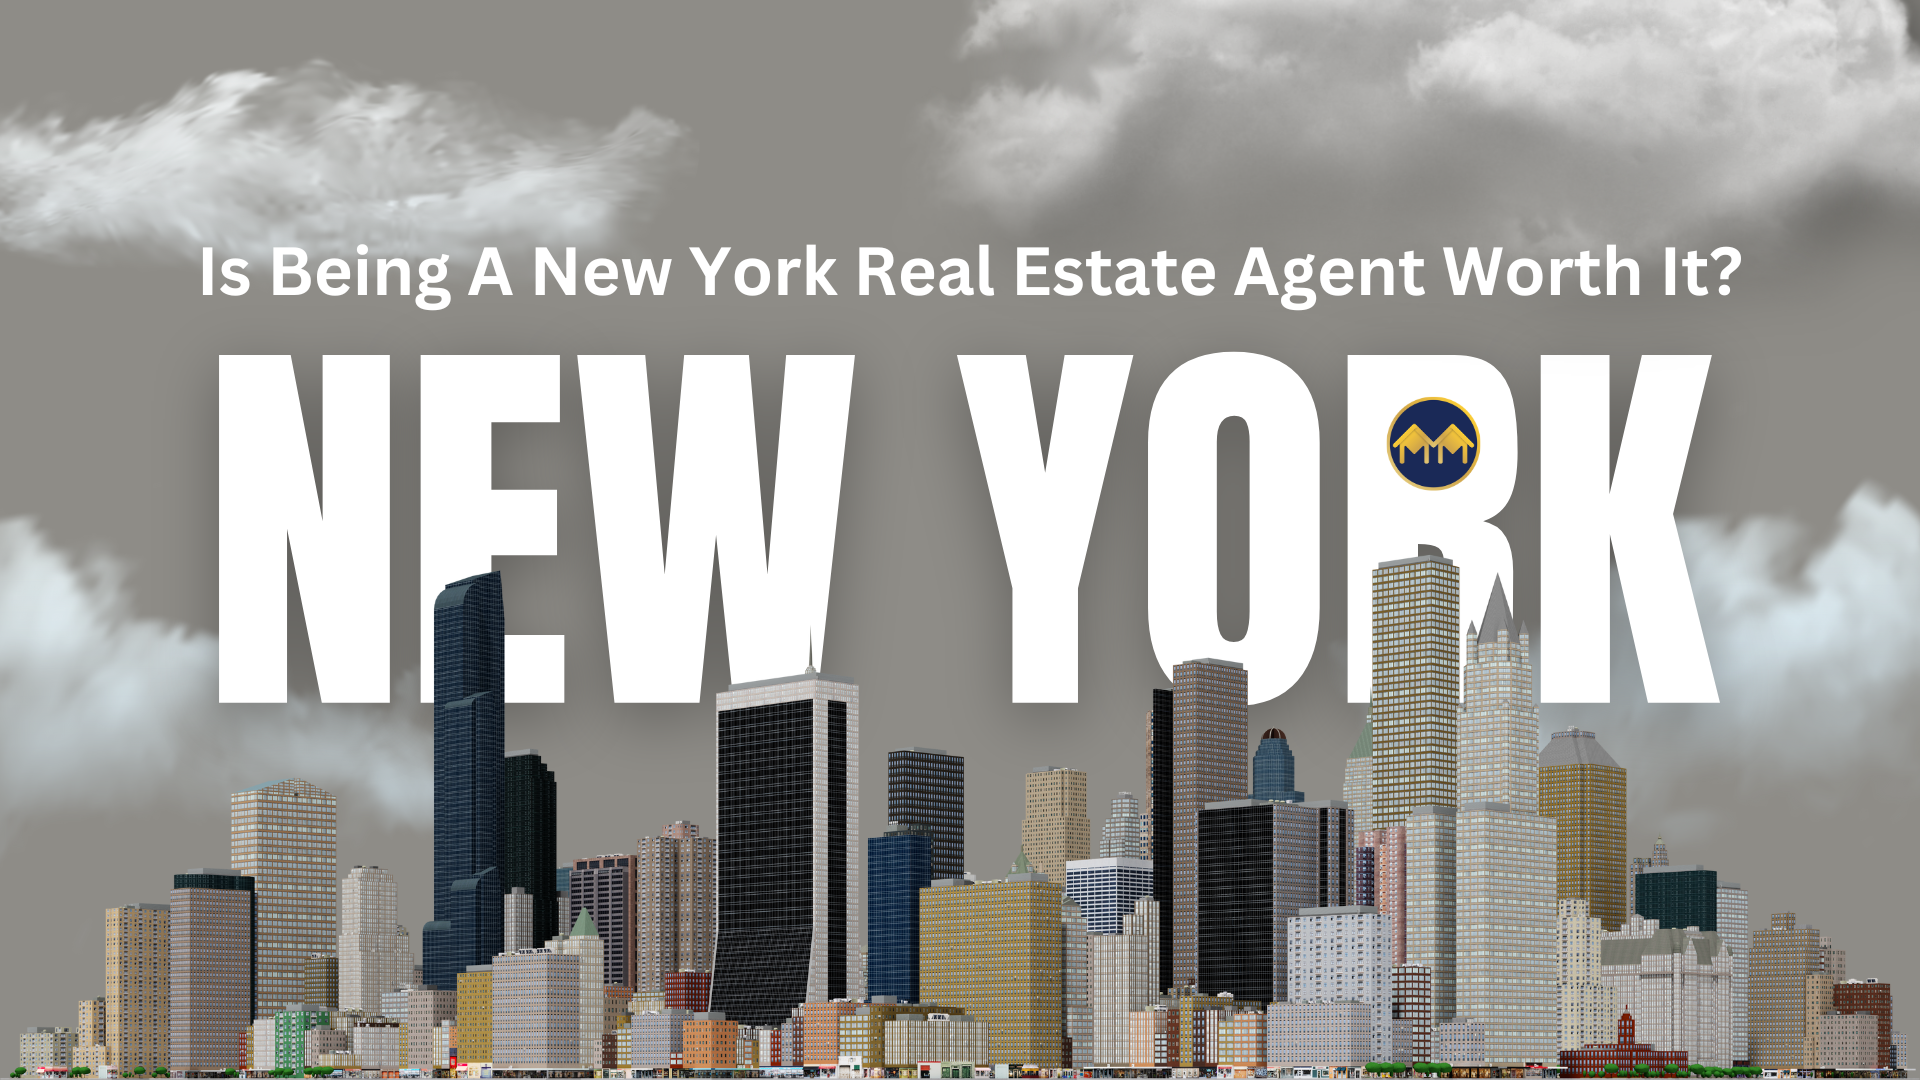 Is Being A New York Real Estate Agent Worth It?